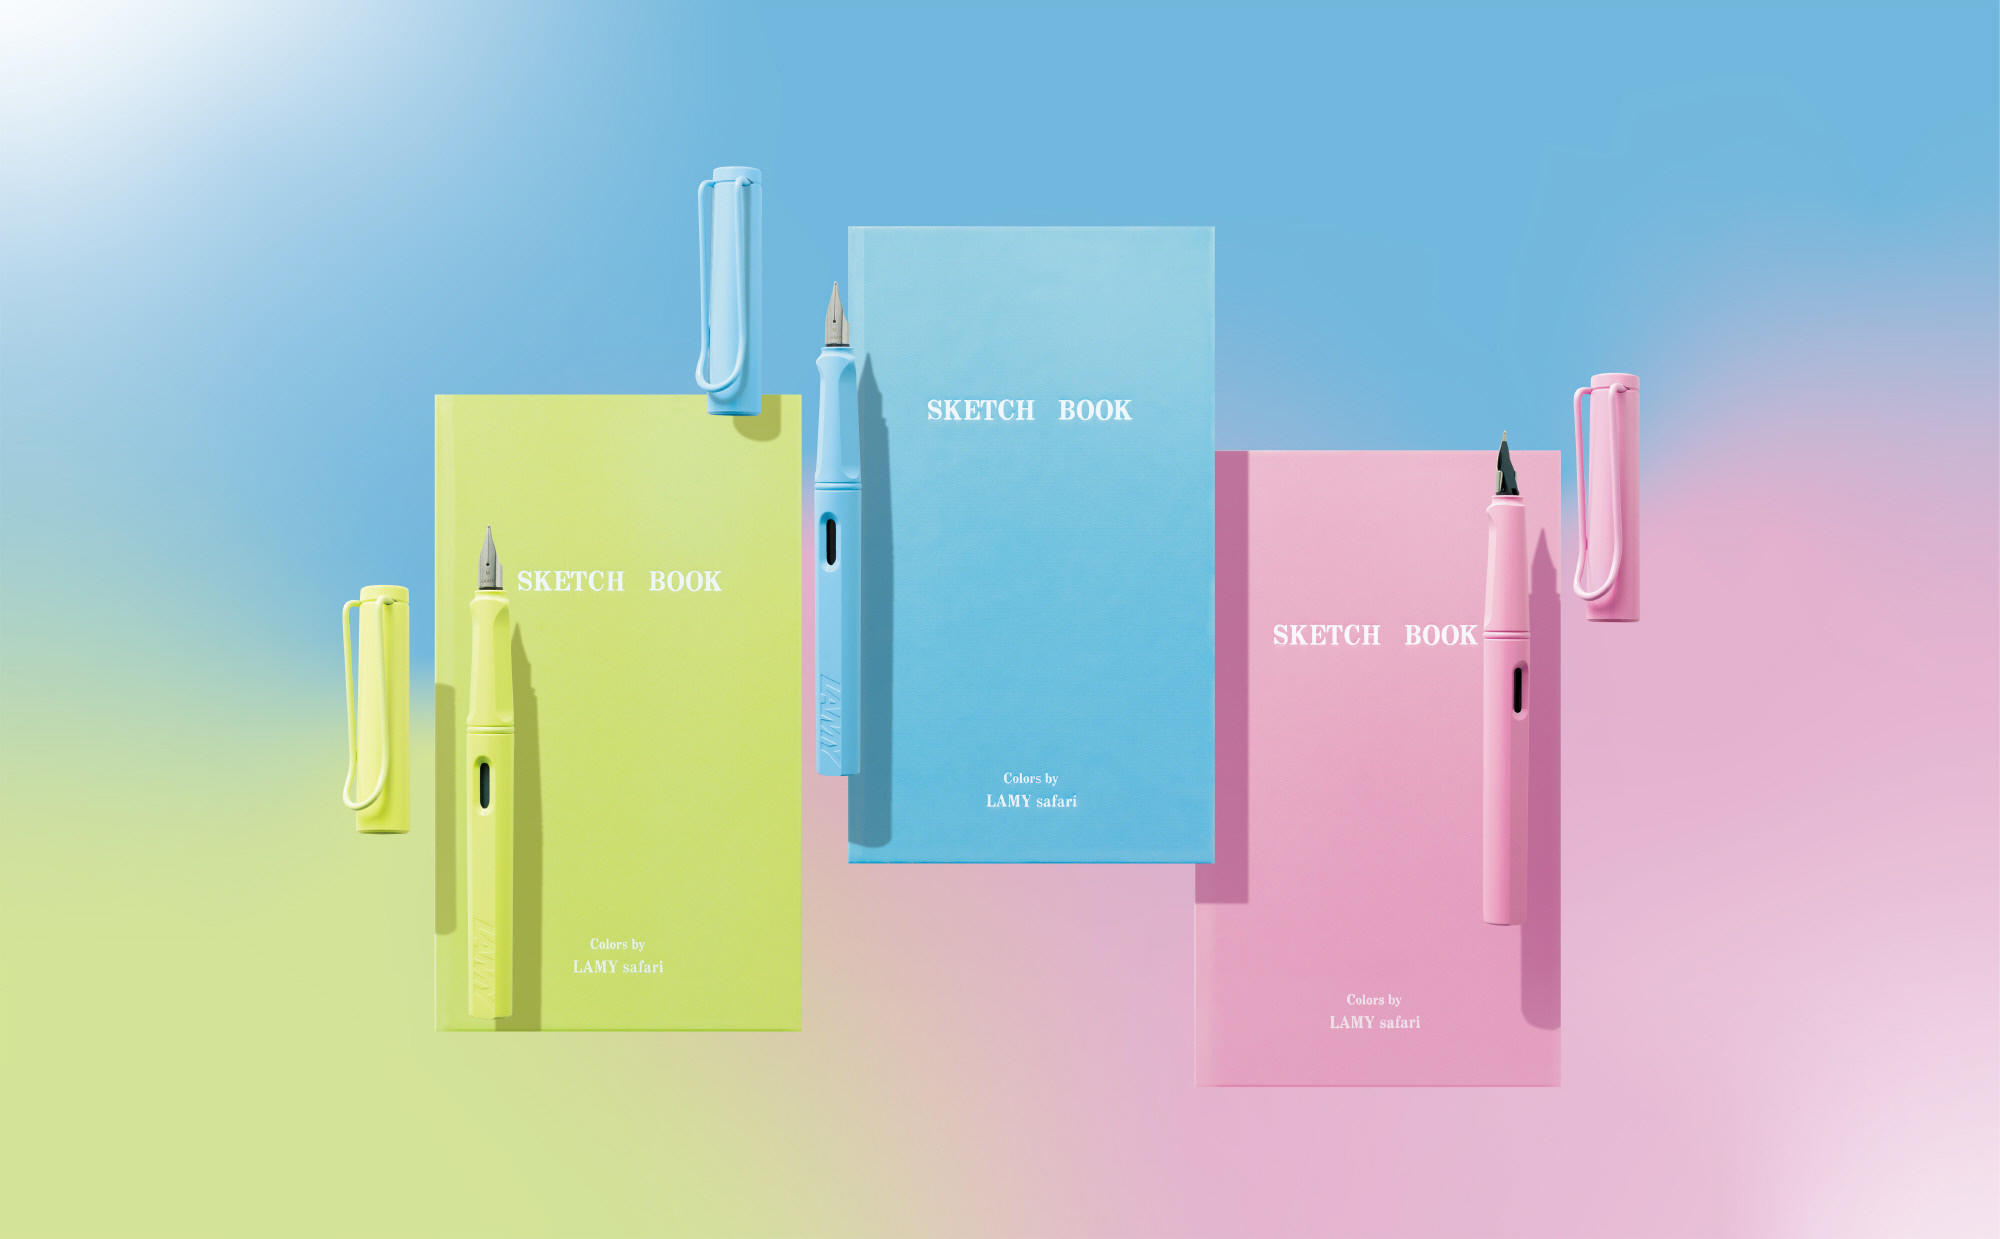 Colors by LAMY safari<></noscript>” class=”figure__img img img-fluid” caption=”false” width=”400″ height=”300″/><br />
Colors by LAMY safari<></p>
<p>The LAMY/Campus Soft Ring Notebook, which was released in November 2022 as Kokuyo’s first collaboration with LAMY, was well received by fans of both brands and LAMY safari.</p>
<p>This time, as an even more powerful collaboration, five companies will collaborate on LAMY, Kokuyo, Ashford, Daigo, and Kobe INK Monogatari (Nagasawa Bungu Center) centered on limited colors for LAMY safari 2023.</p>
<p>The concept of the 2023 LAMY safari limited color is “Delight”. It contains the desire to overcome the difficulties of the spread of the new coronavirus infection and rejoice together that we have entered a new era. KOKUYO offers “Surveying Field Book < Colors by LAMY safari>” which is dressed in three colors of safari’s 2023 limited edition colors: Spring Green, Aqua Sky, and Light Rose.</p>
<p>The Survey Field Book is a popular mini notebook with a slim size and hard cover that fits easily in a pocket or bag, making it easy to carry and write while standing. In this limited edition design, we adopted KOKUYO’s original “book paper” suitable for writing with a fountain pen on the inner paper. The border is a gray 3mm grid border.</p>
<p>In addition, the words “Colors by LAMY safari” are casually decorated on the cover, and a life-size line drawing of LAMY safari is printed on the back cover, creating a special feeling unique to the collaboration.</p>
<p>■ Scheduled release: Thursday, May 25, 2023 * Pre-sale will be held at four stores from Friday, April 28: Lamineuman Yokohama store, Itoya Ginza main store, Isetan Shinjuku store, and Nagasawa Bungu Center main store.<br />■Manufacturer’s suggested retail price (excluding consumption tax): 540 yen</p>
<p>
Features of <